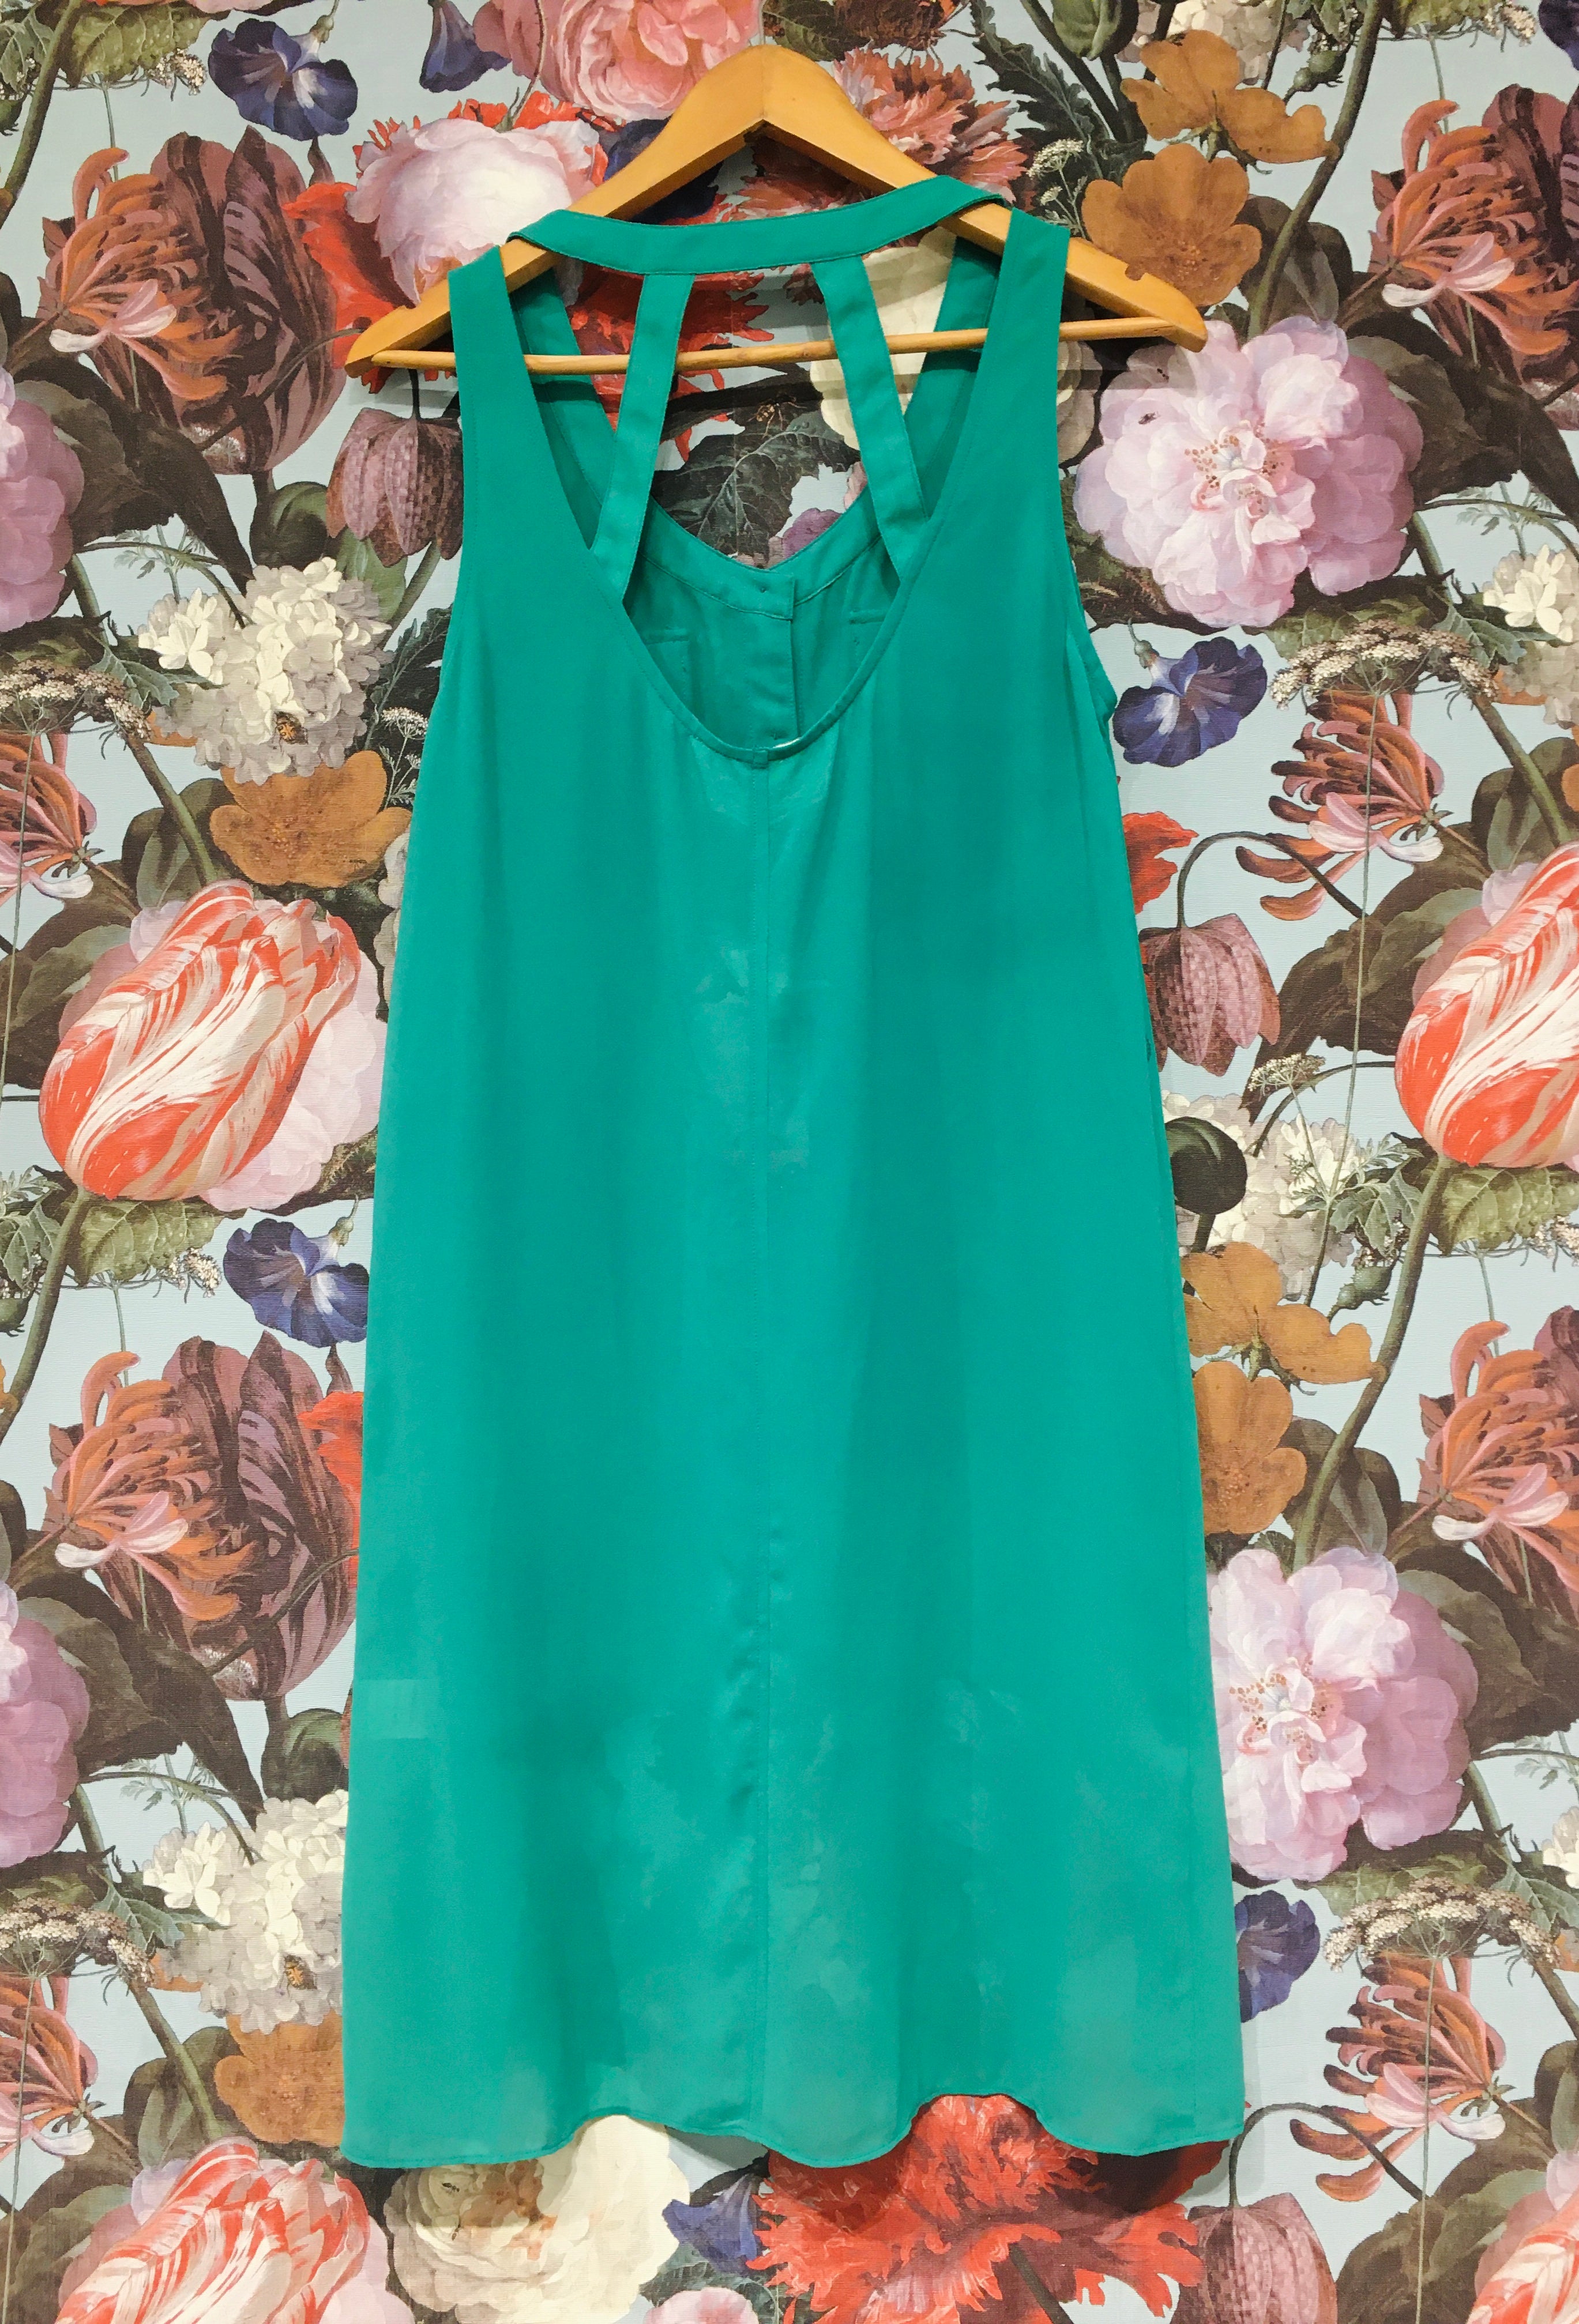 PINK MARTINI // MARCELLE DRESS GREEN